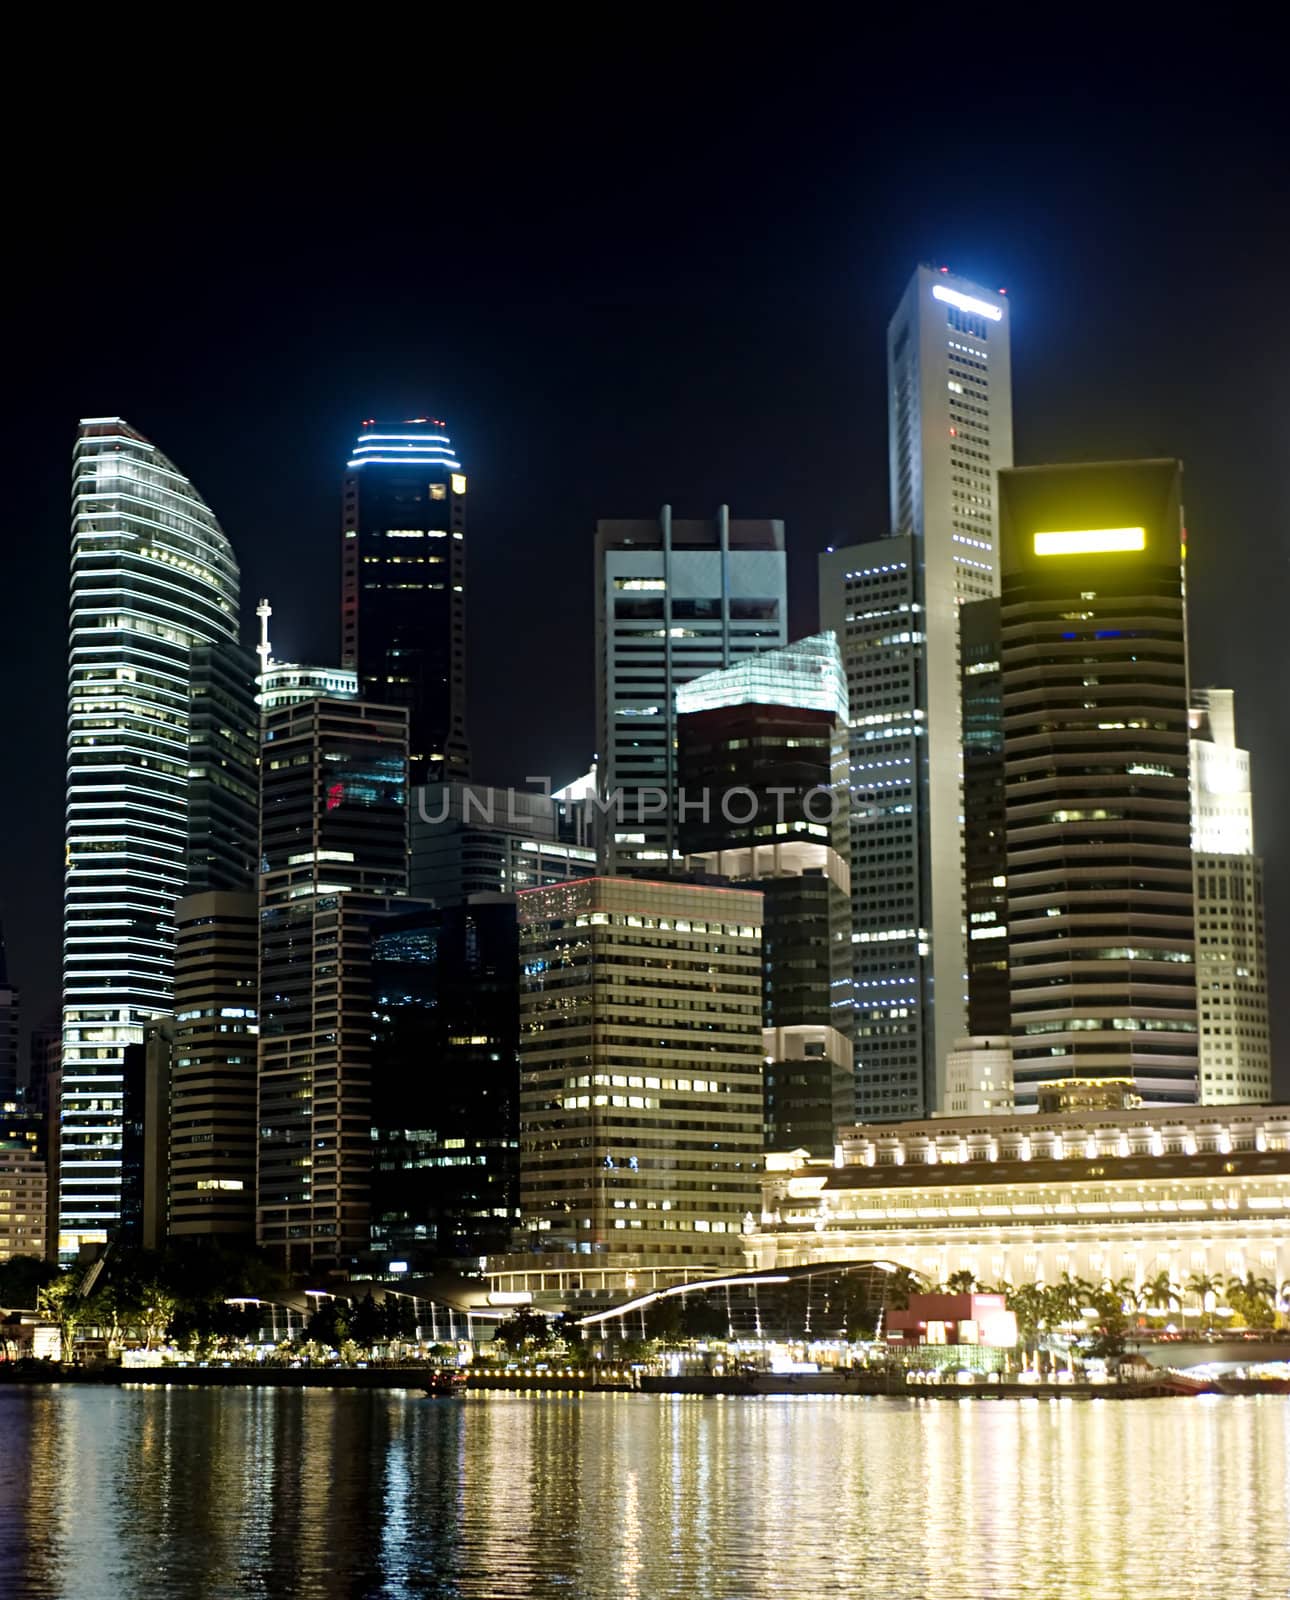 Business center of Singapore at night 